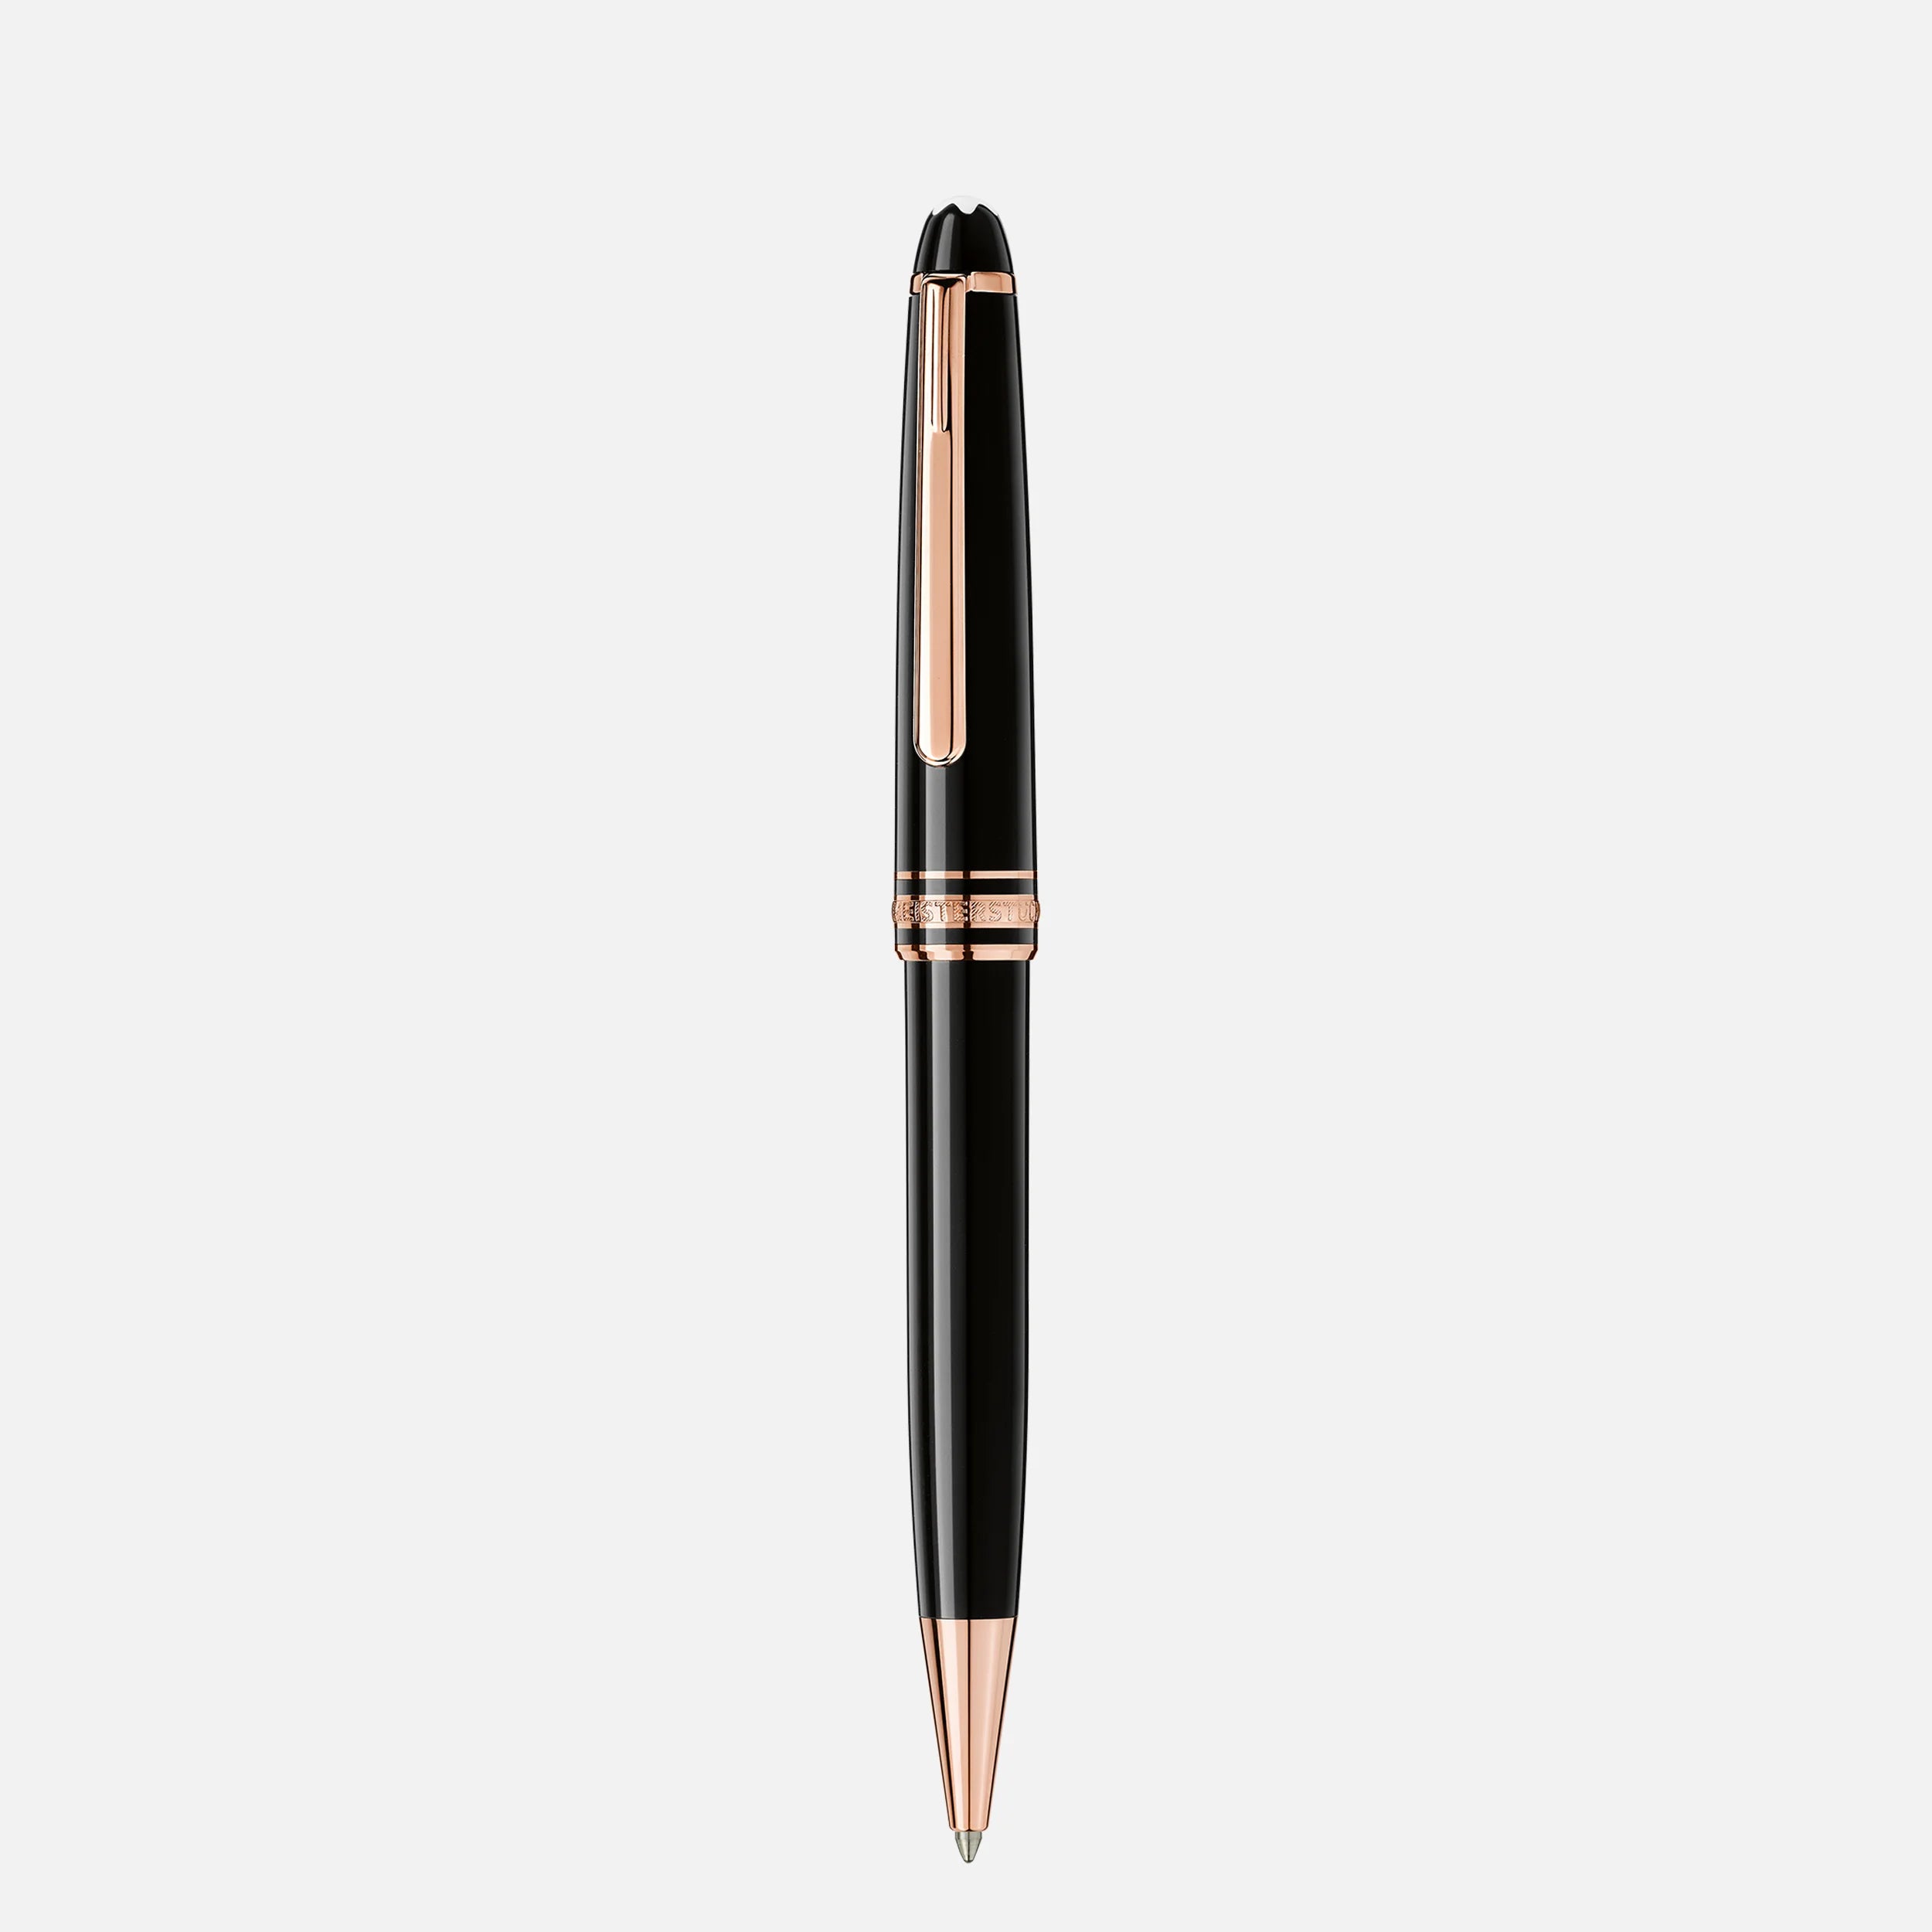 Montblanc Meisterstück Red Gold-Coated Classique kuglepen-exchage-image